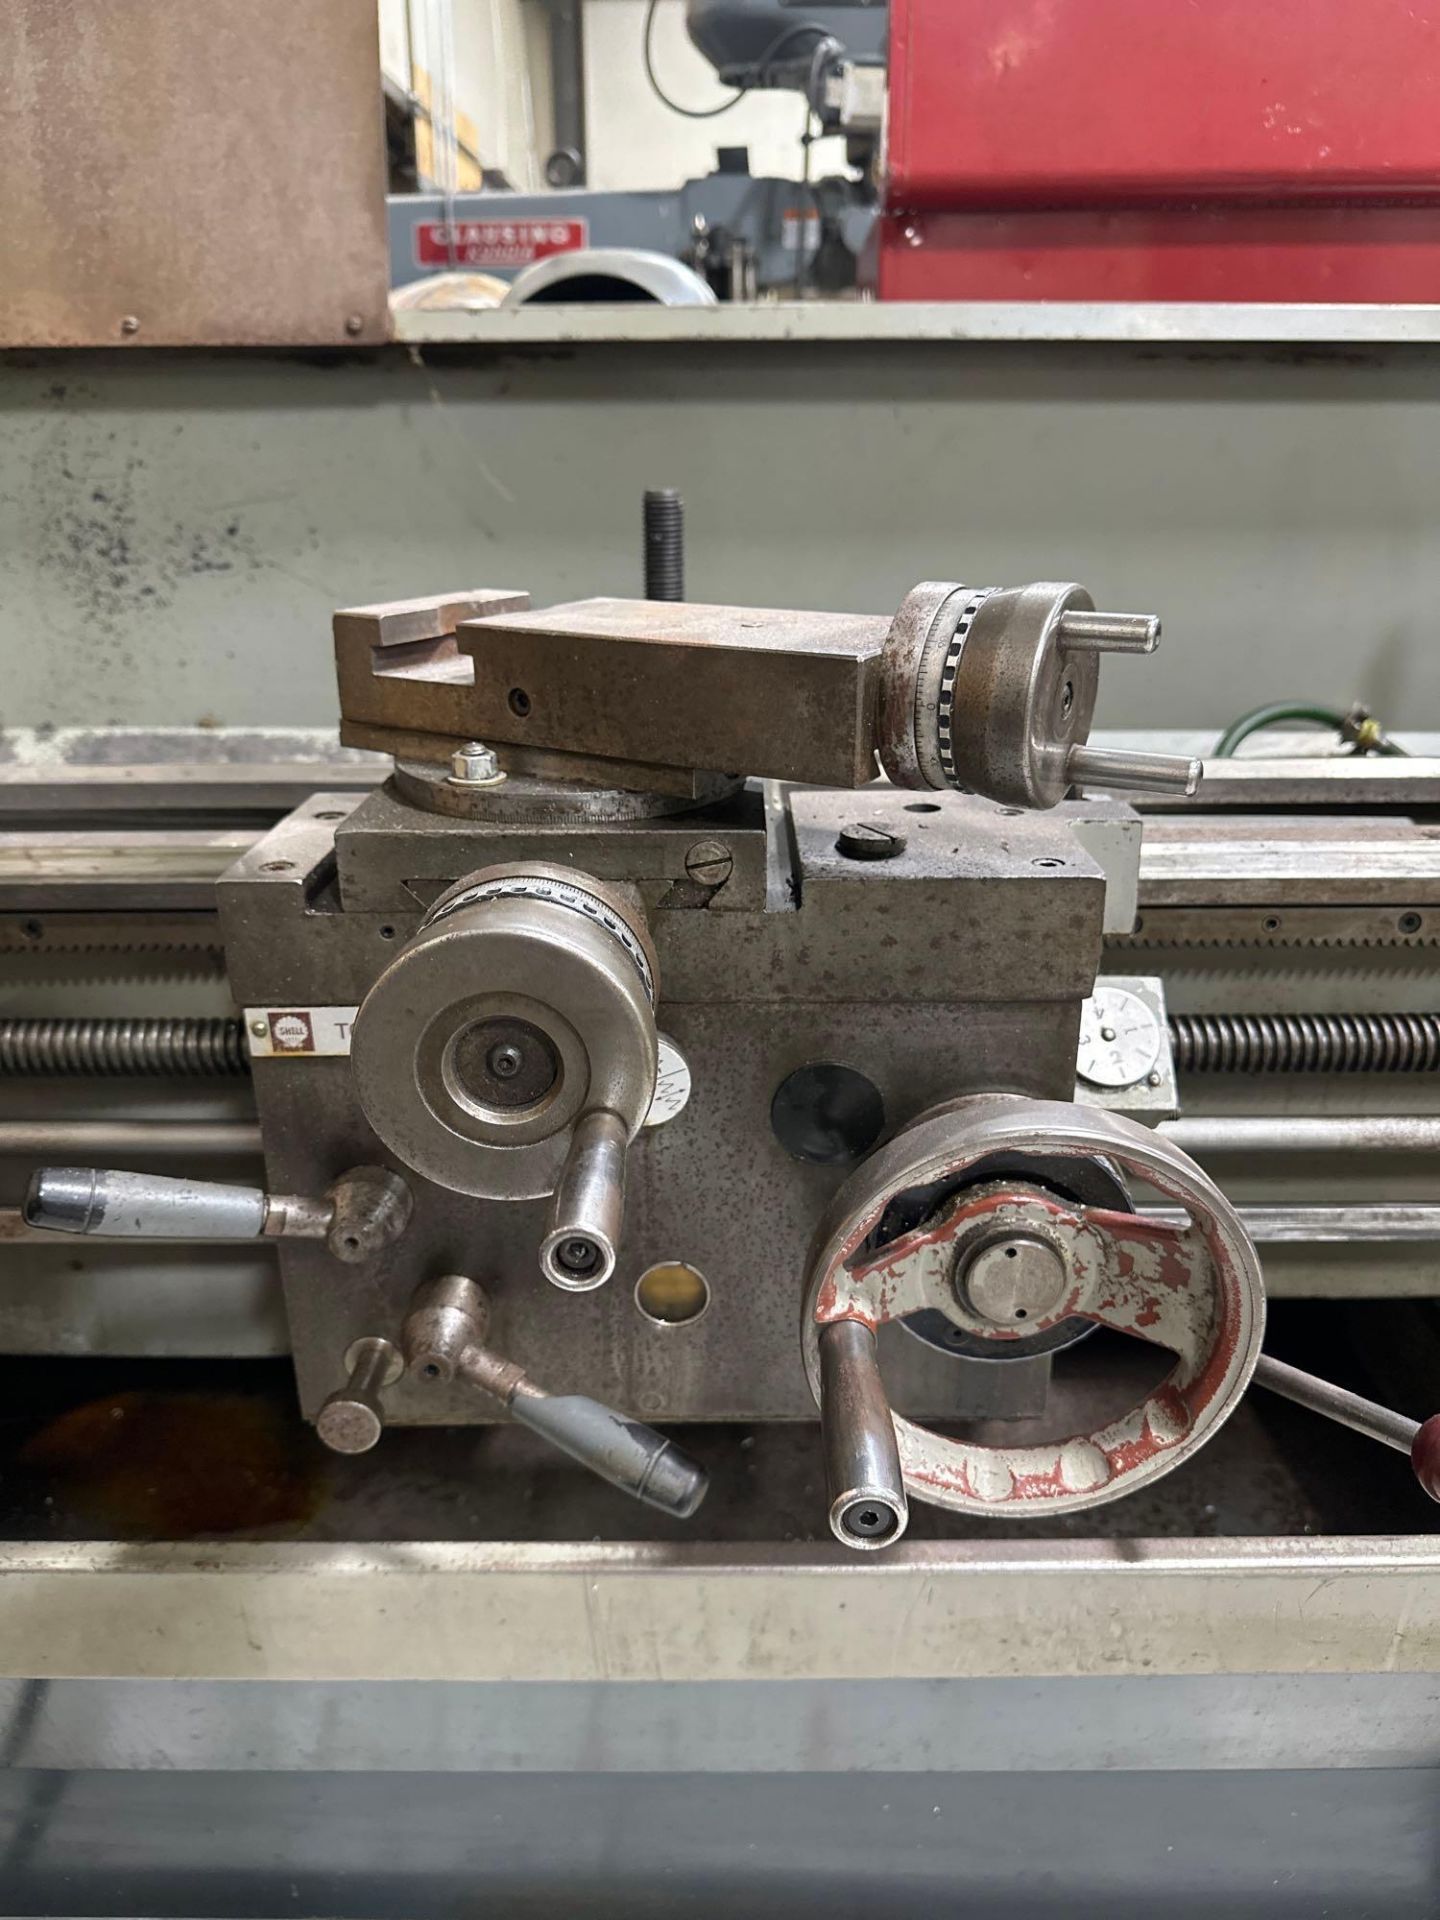 Clausing Cochester Lathe, 8" 3-Jaw Chuck, 2" Spindle Bore, 41" Distance Between Center - Image 7 of 7